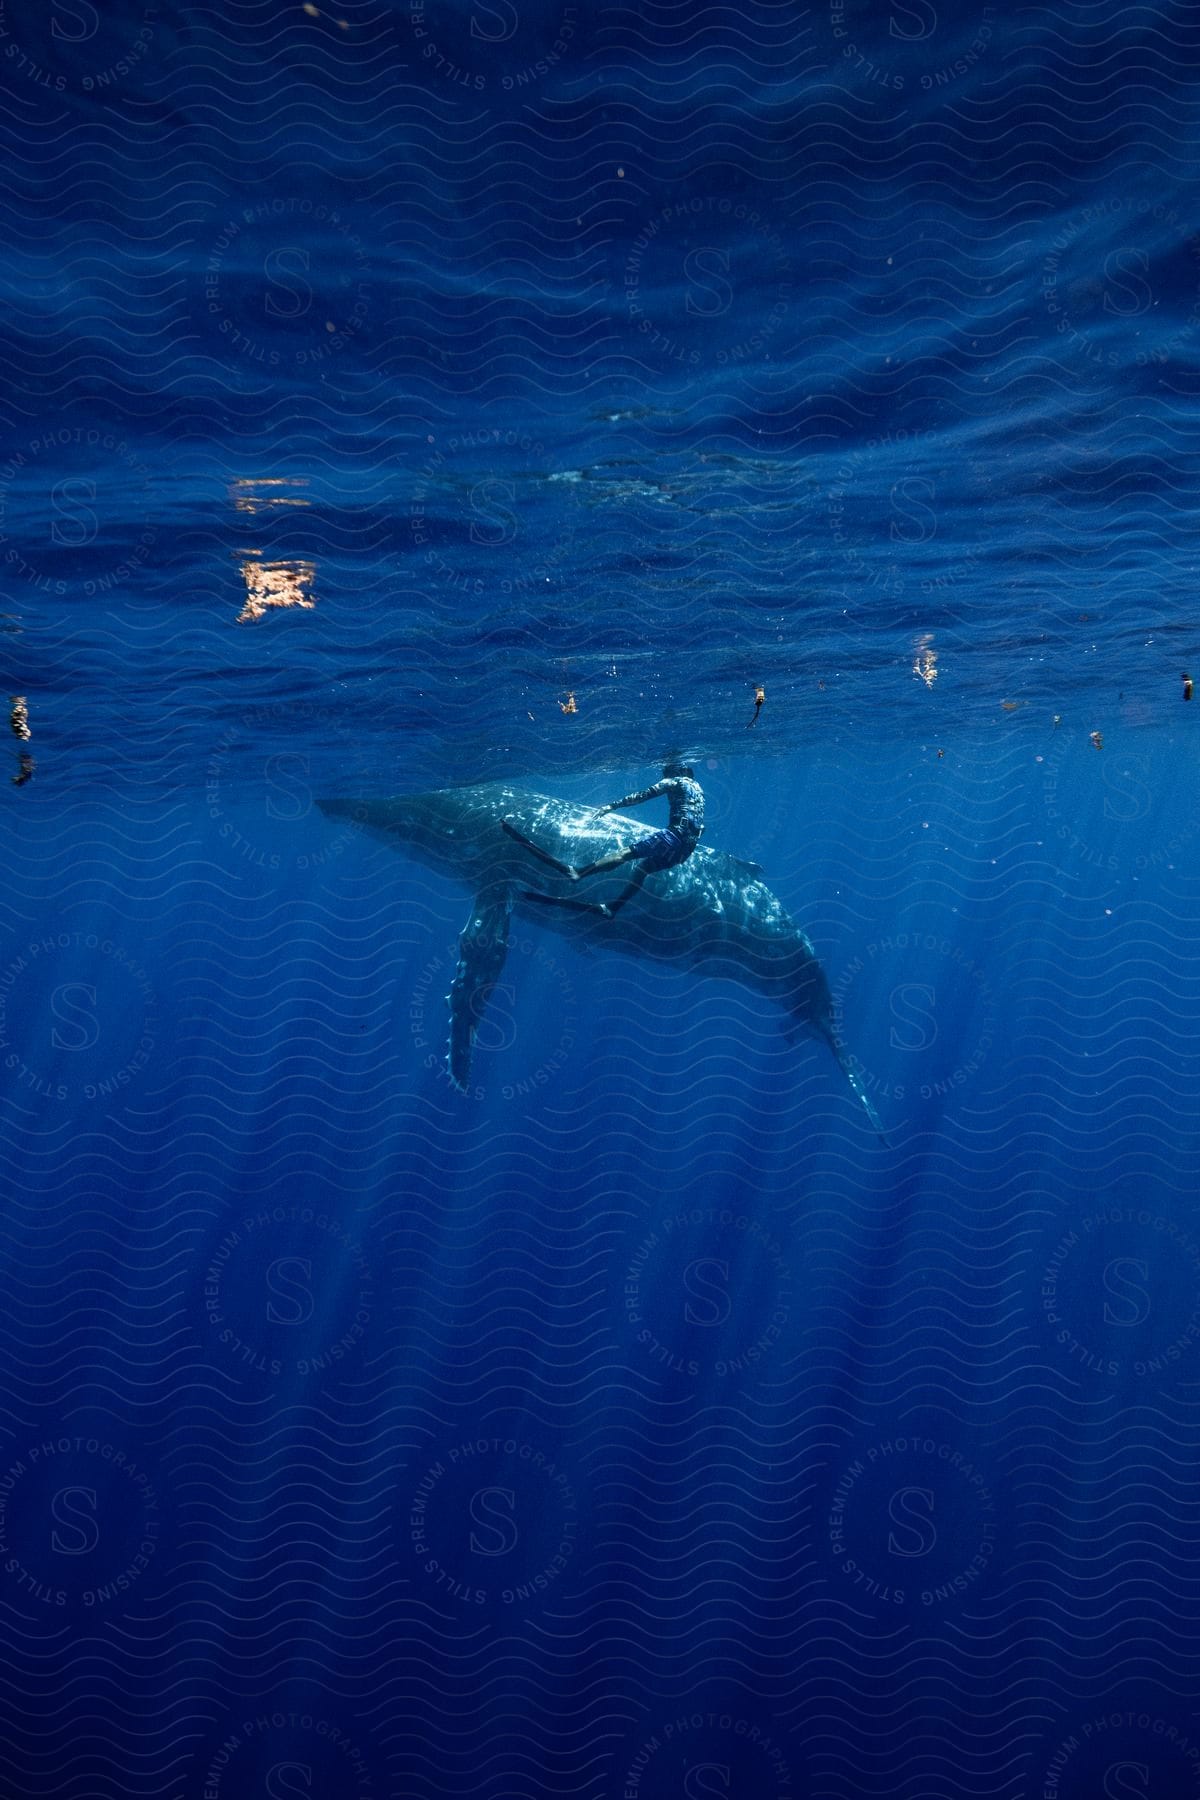 A serene encounter with a majestic whale in the depths of the ocean.